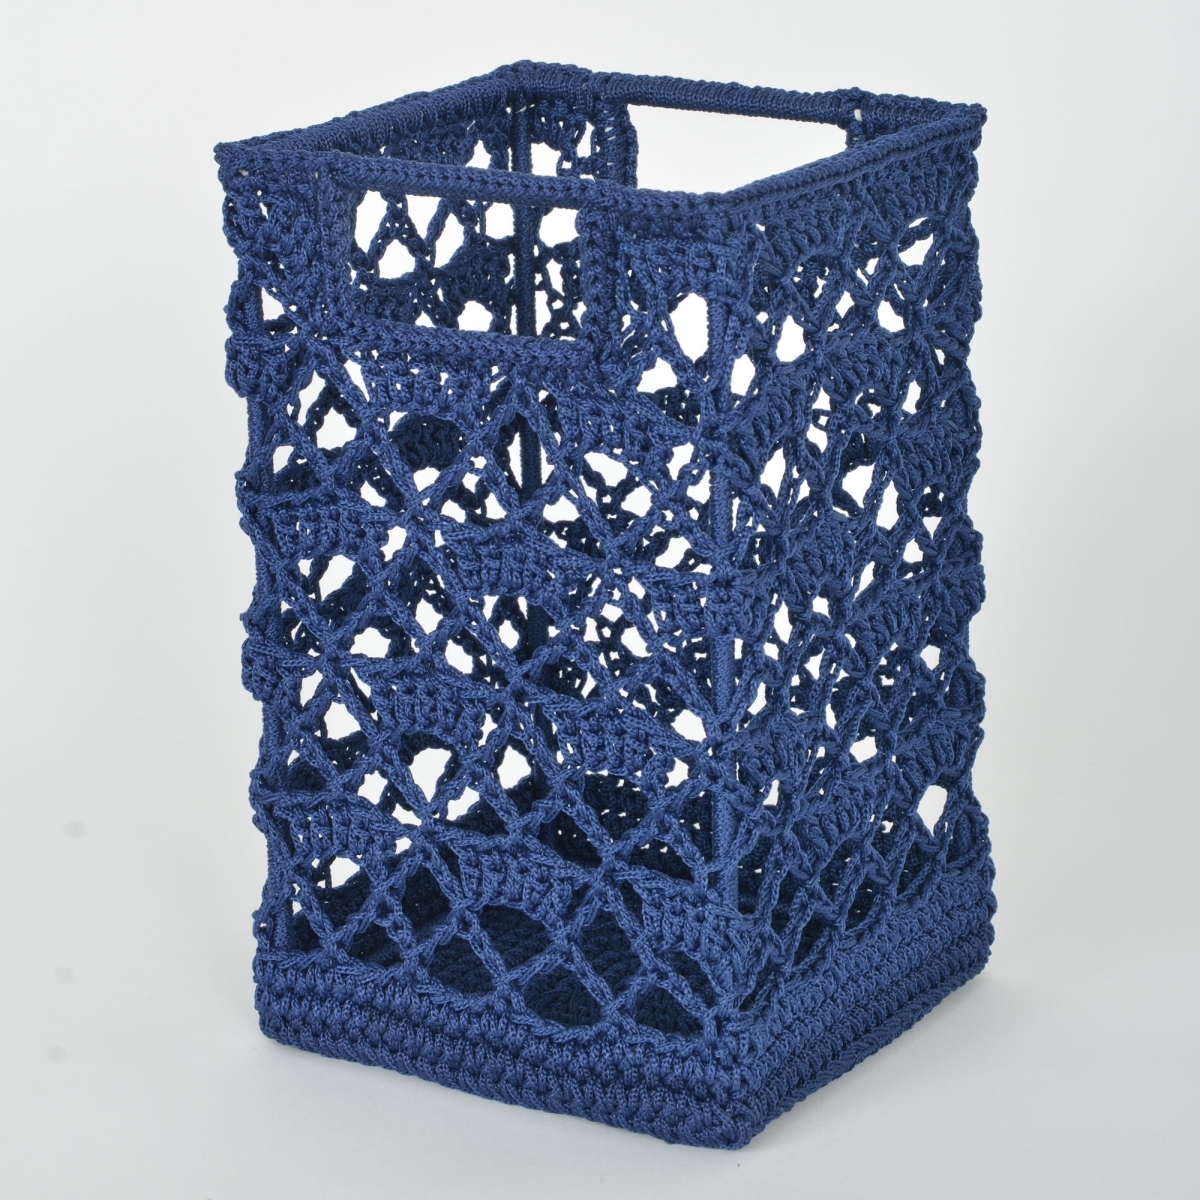 Picture of Heritage Lace MC-1125NV Mode Crochet Basket, Navy - 9 x 5.5 x 5.5 in.